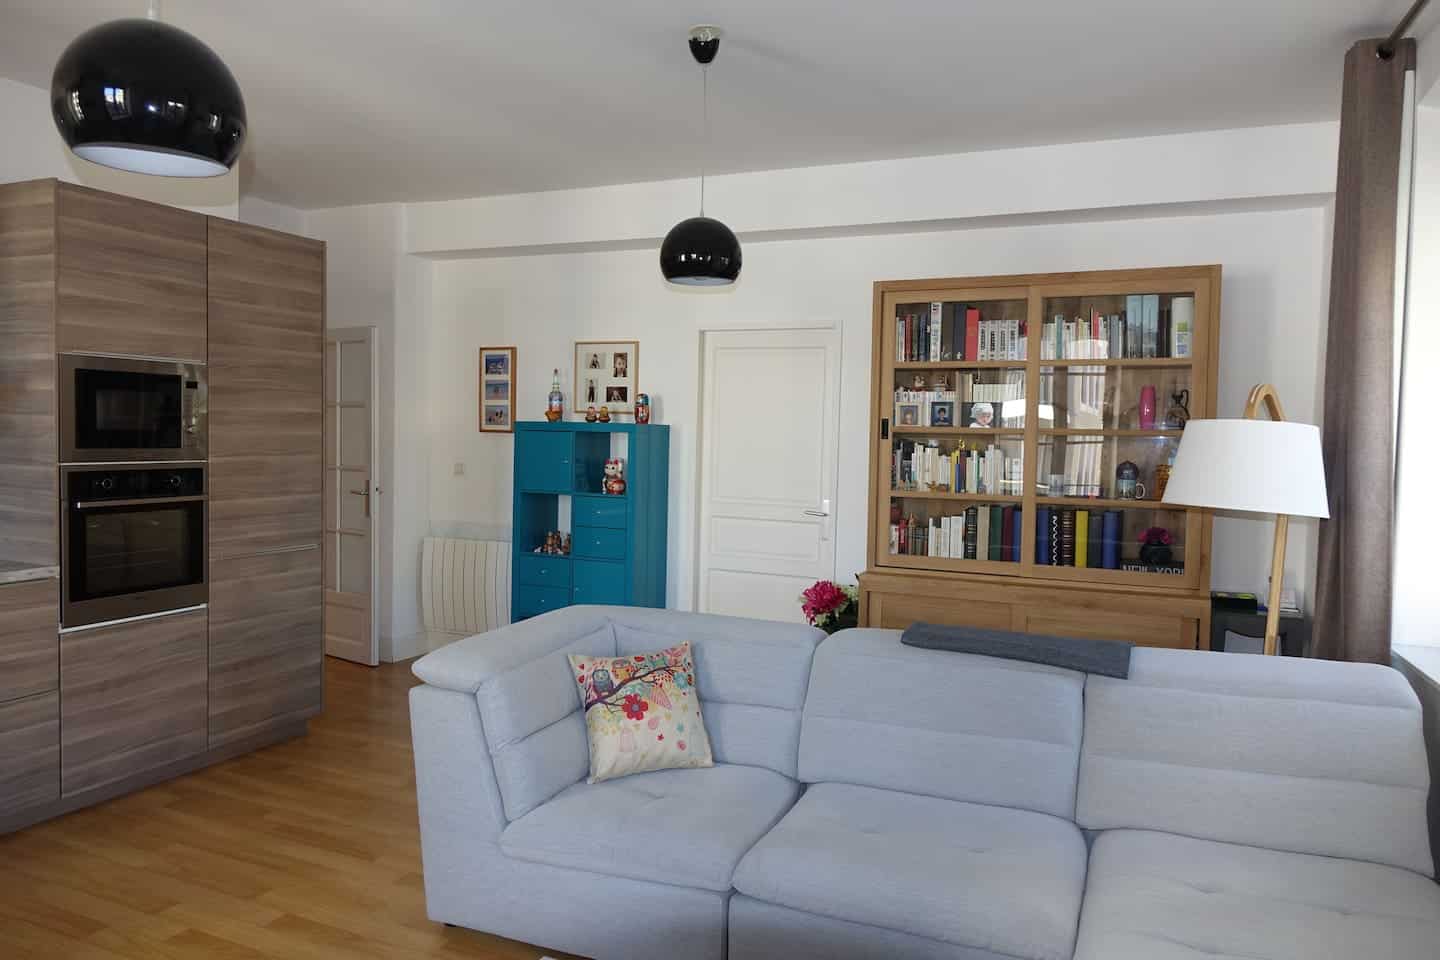 Image of Airbnb rental in Marseille, France